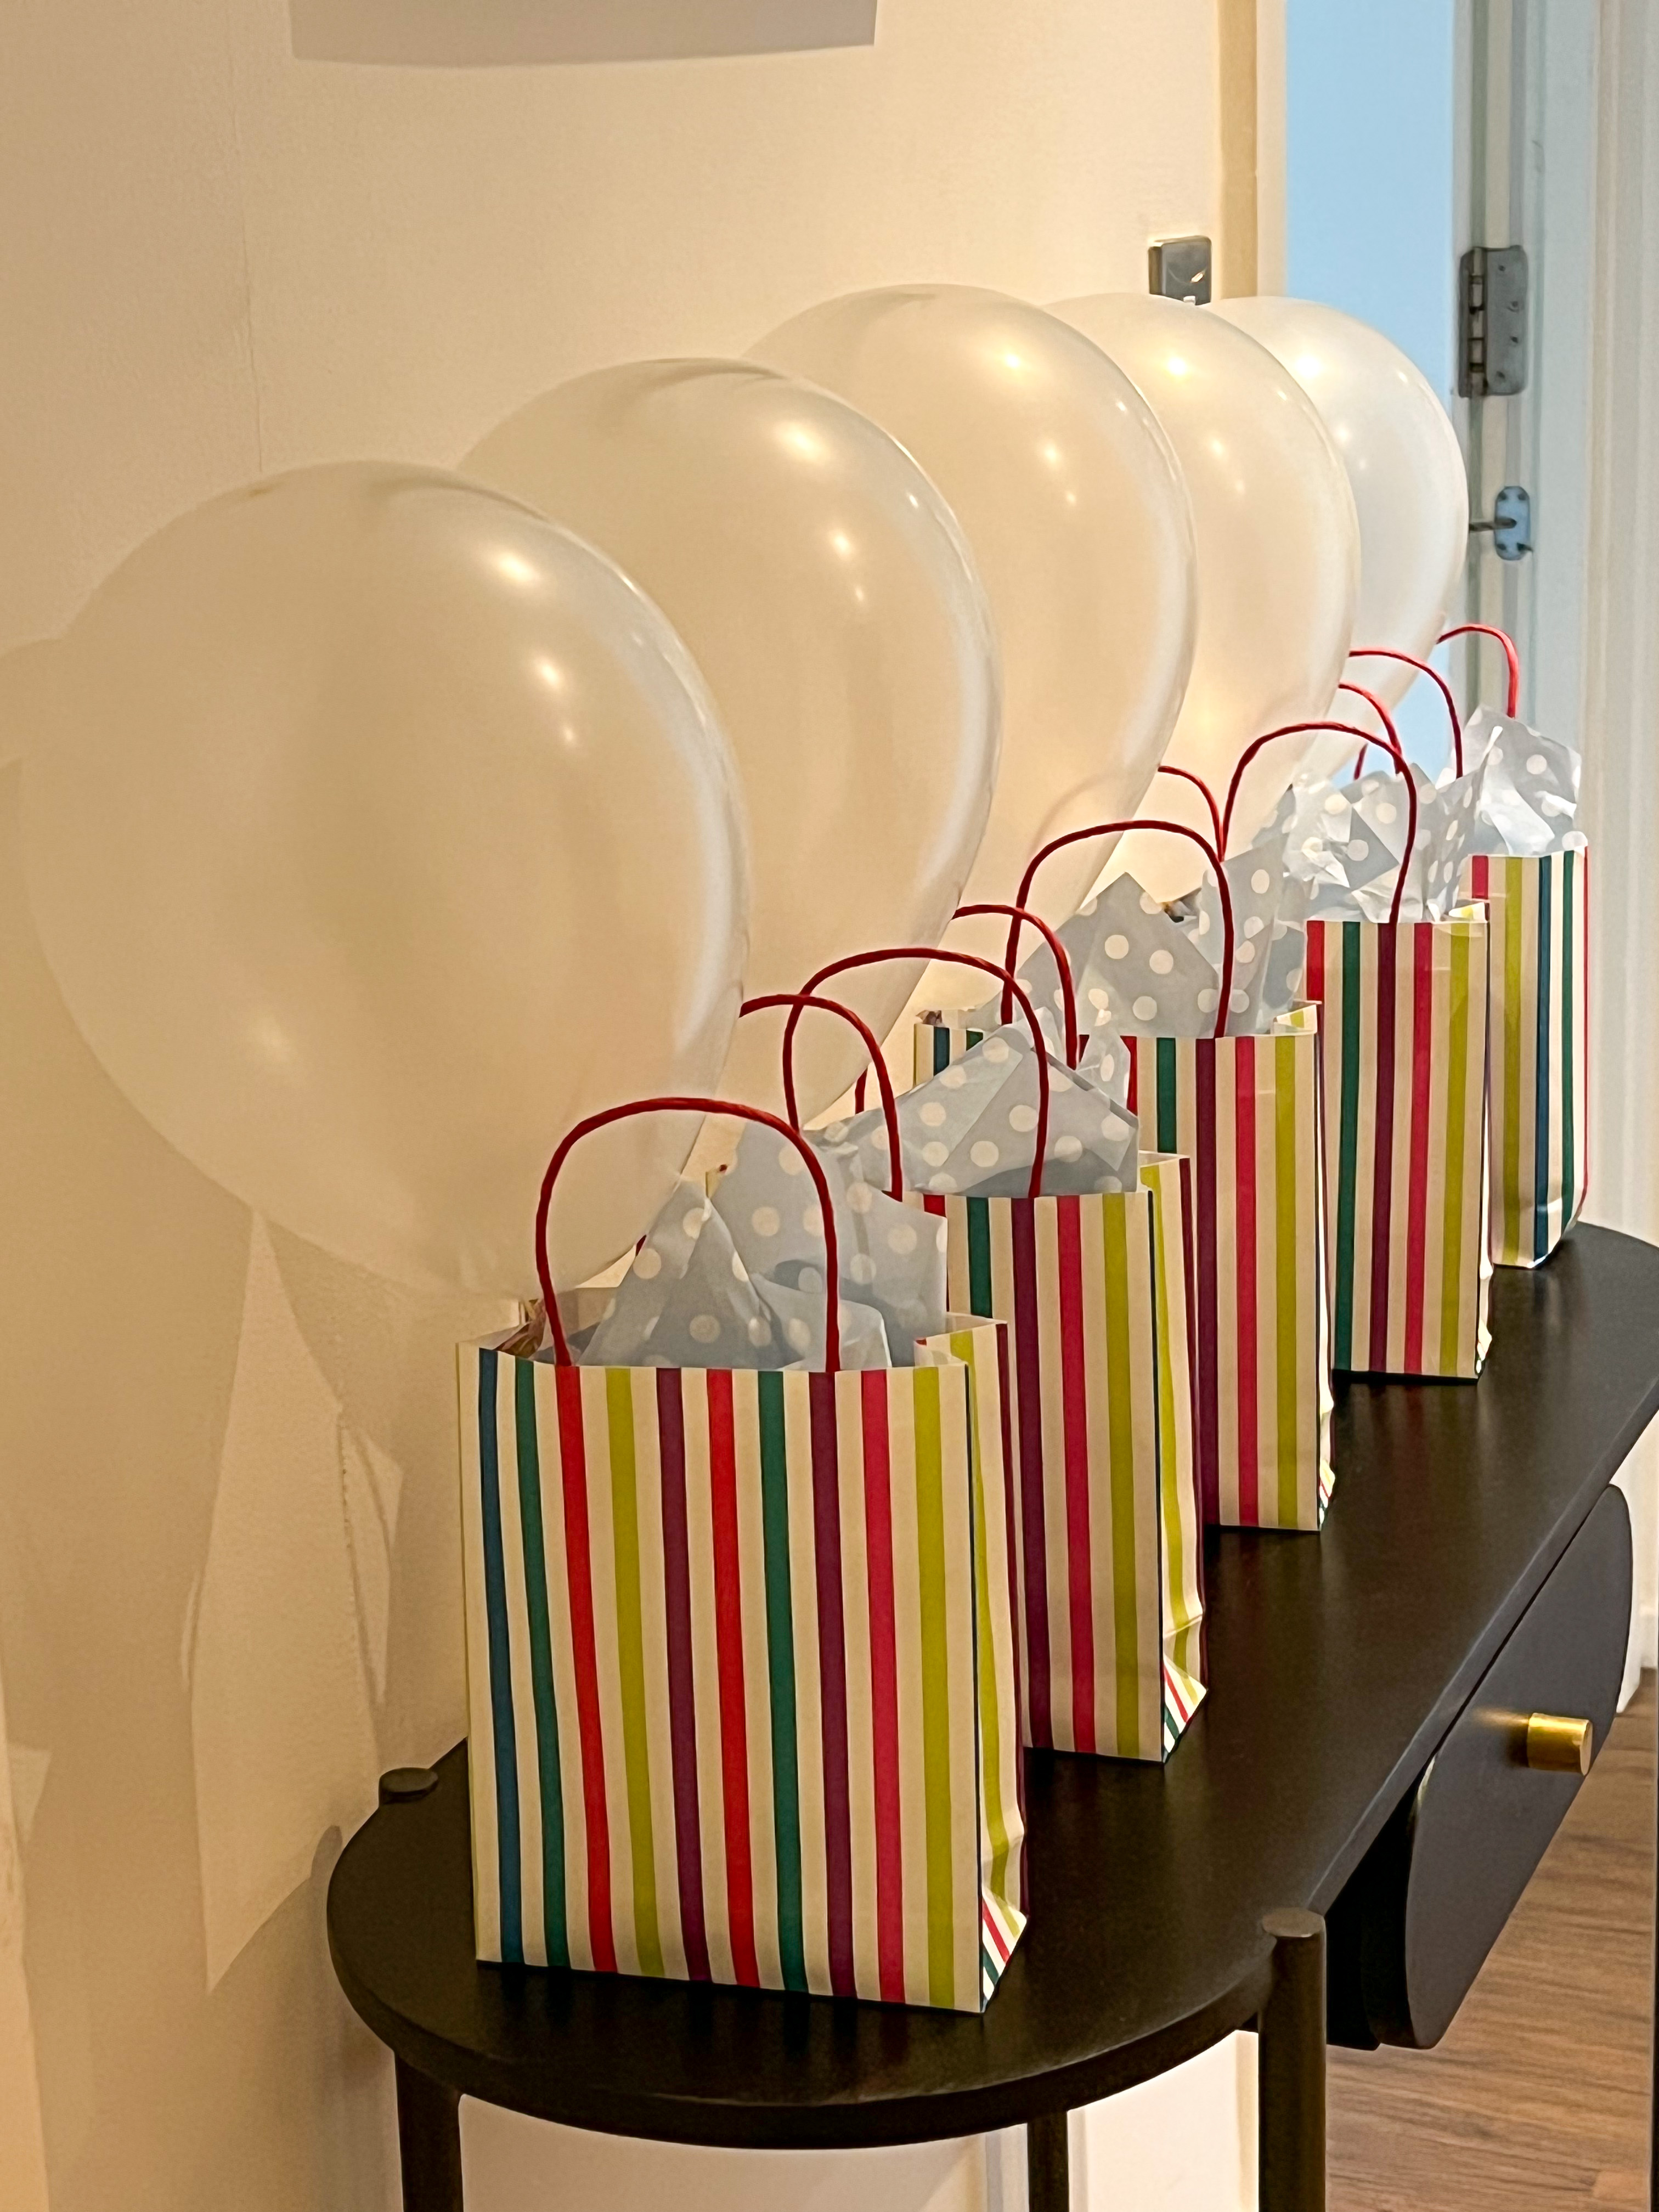 Balloon themed party decorations